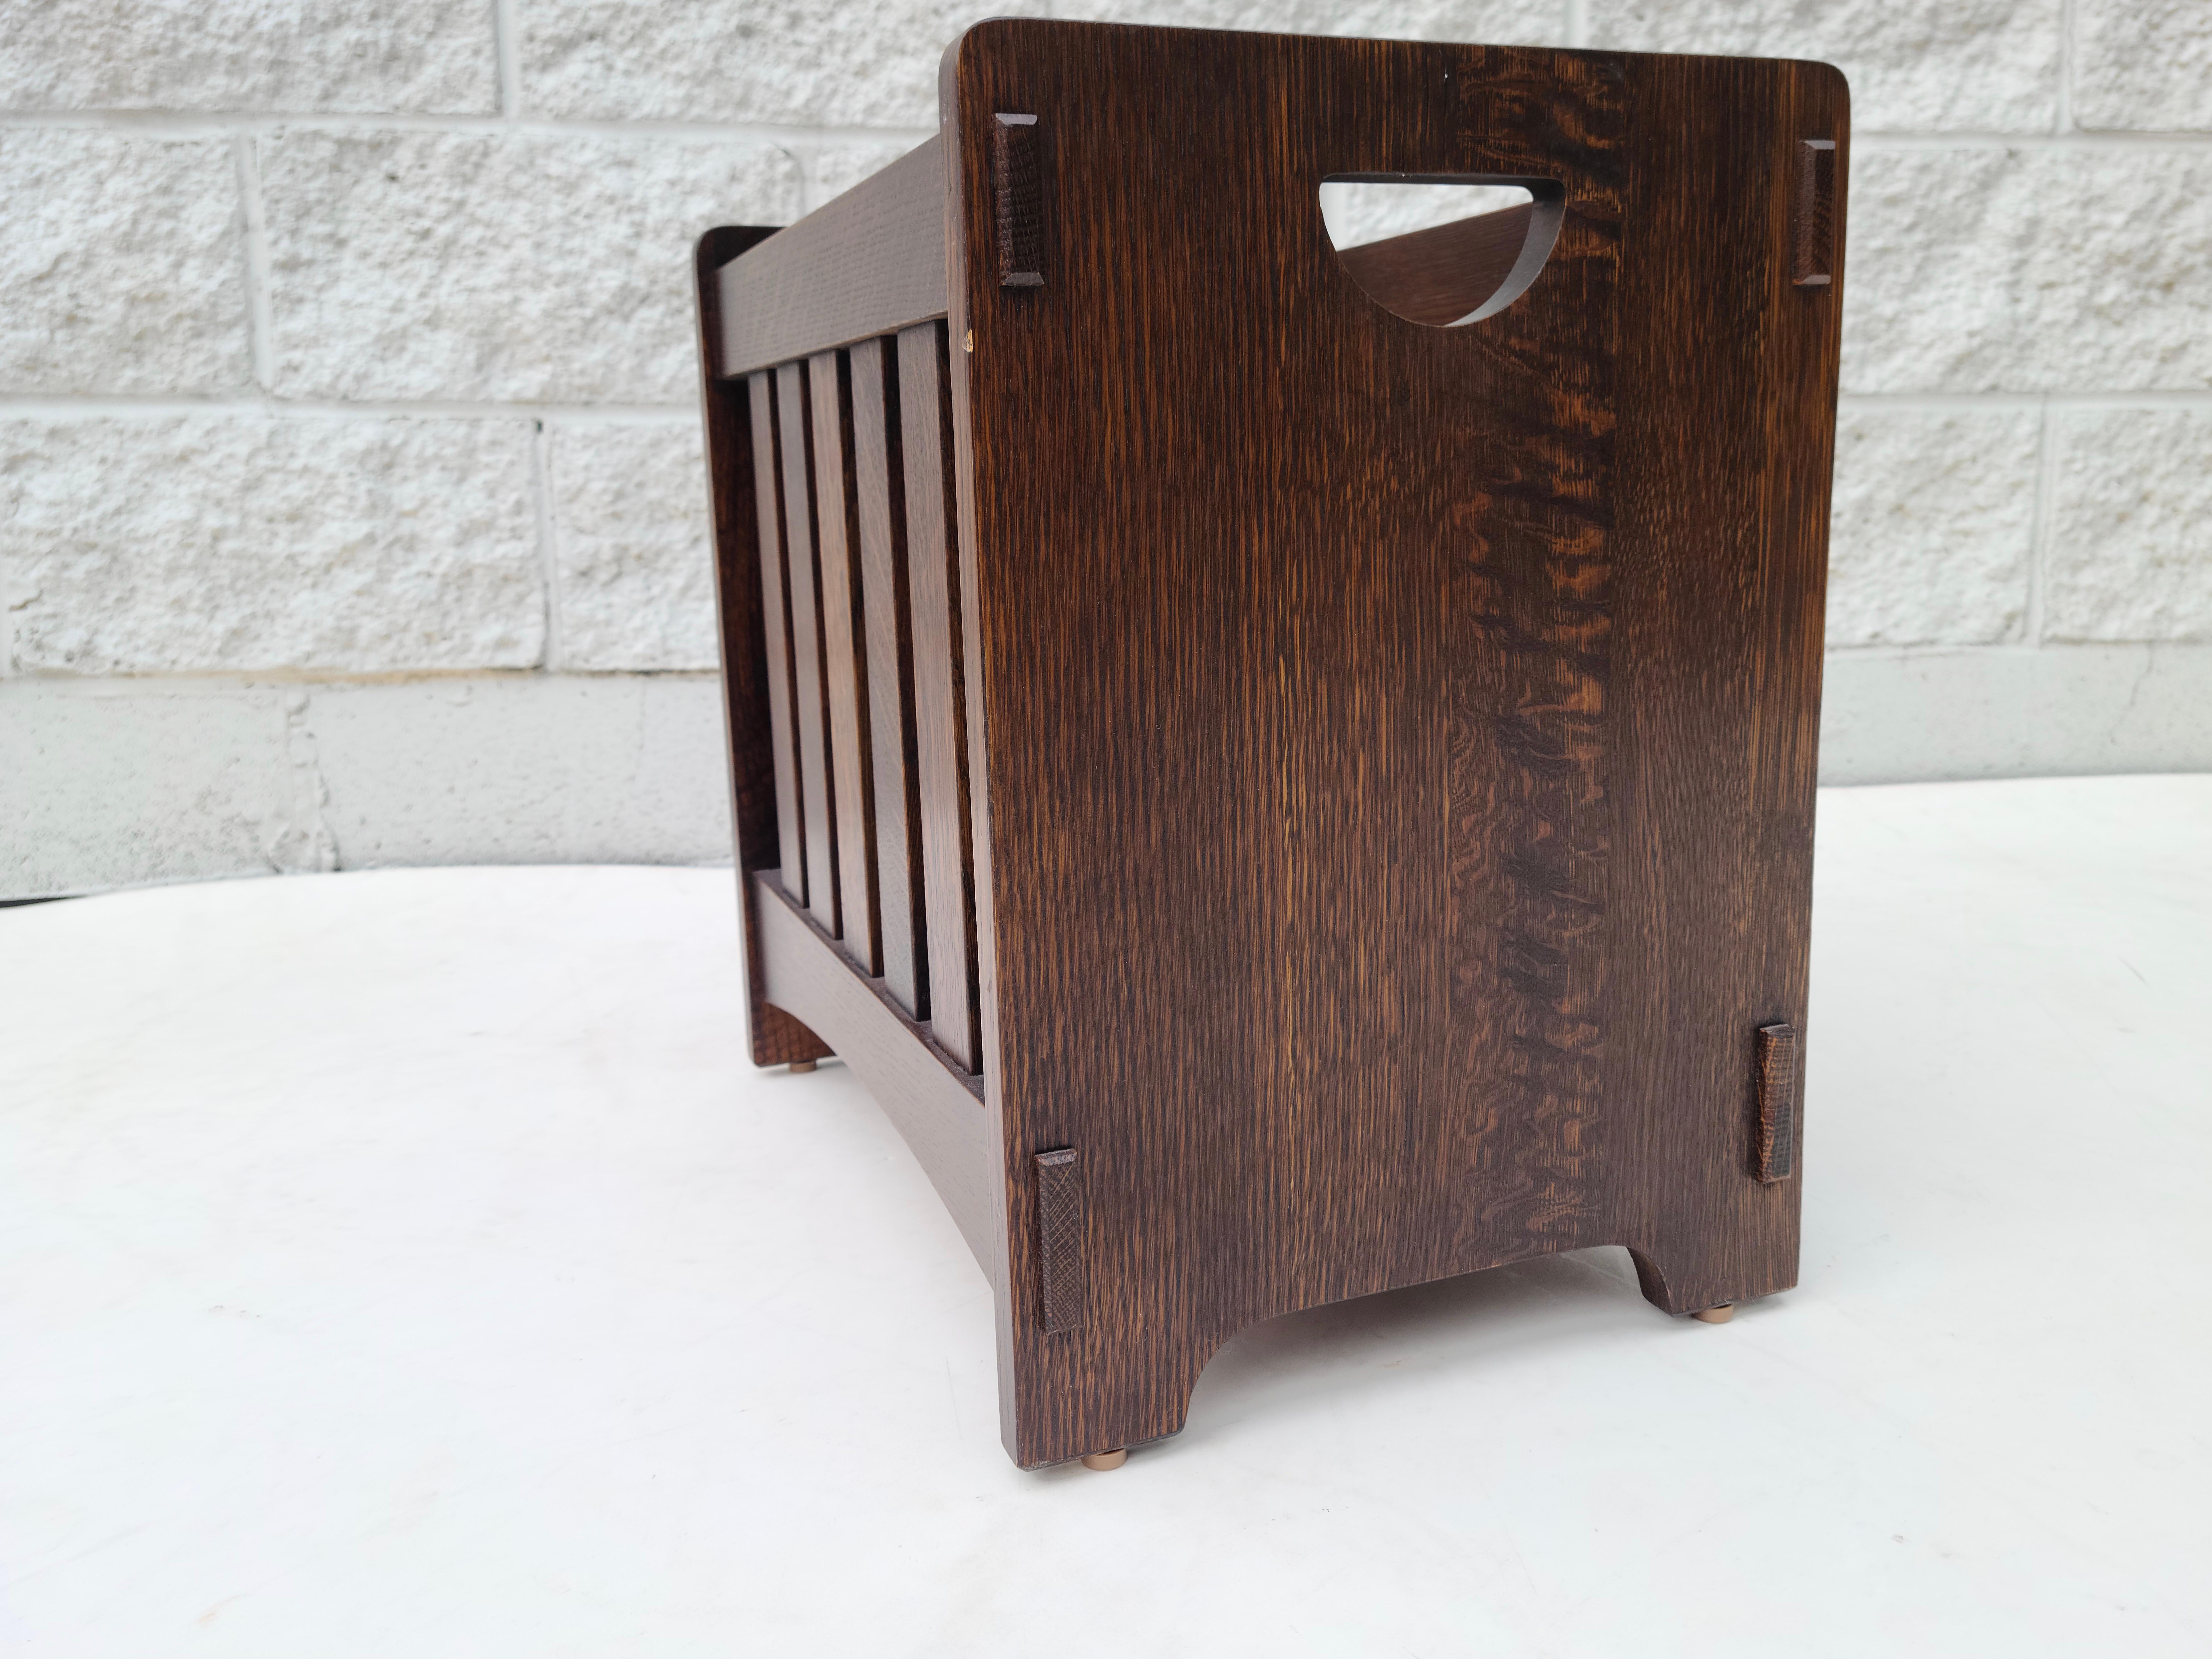 Stickley Mission Arts and Crafts Magazine Rack in the style of Gustav 4